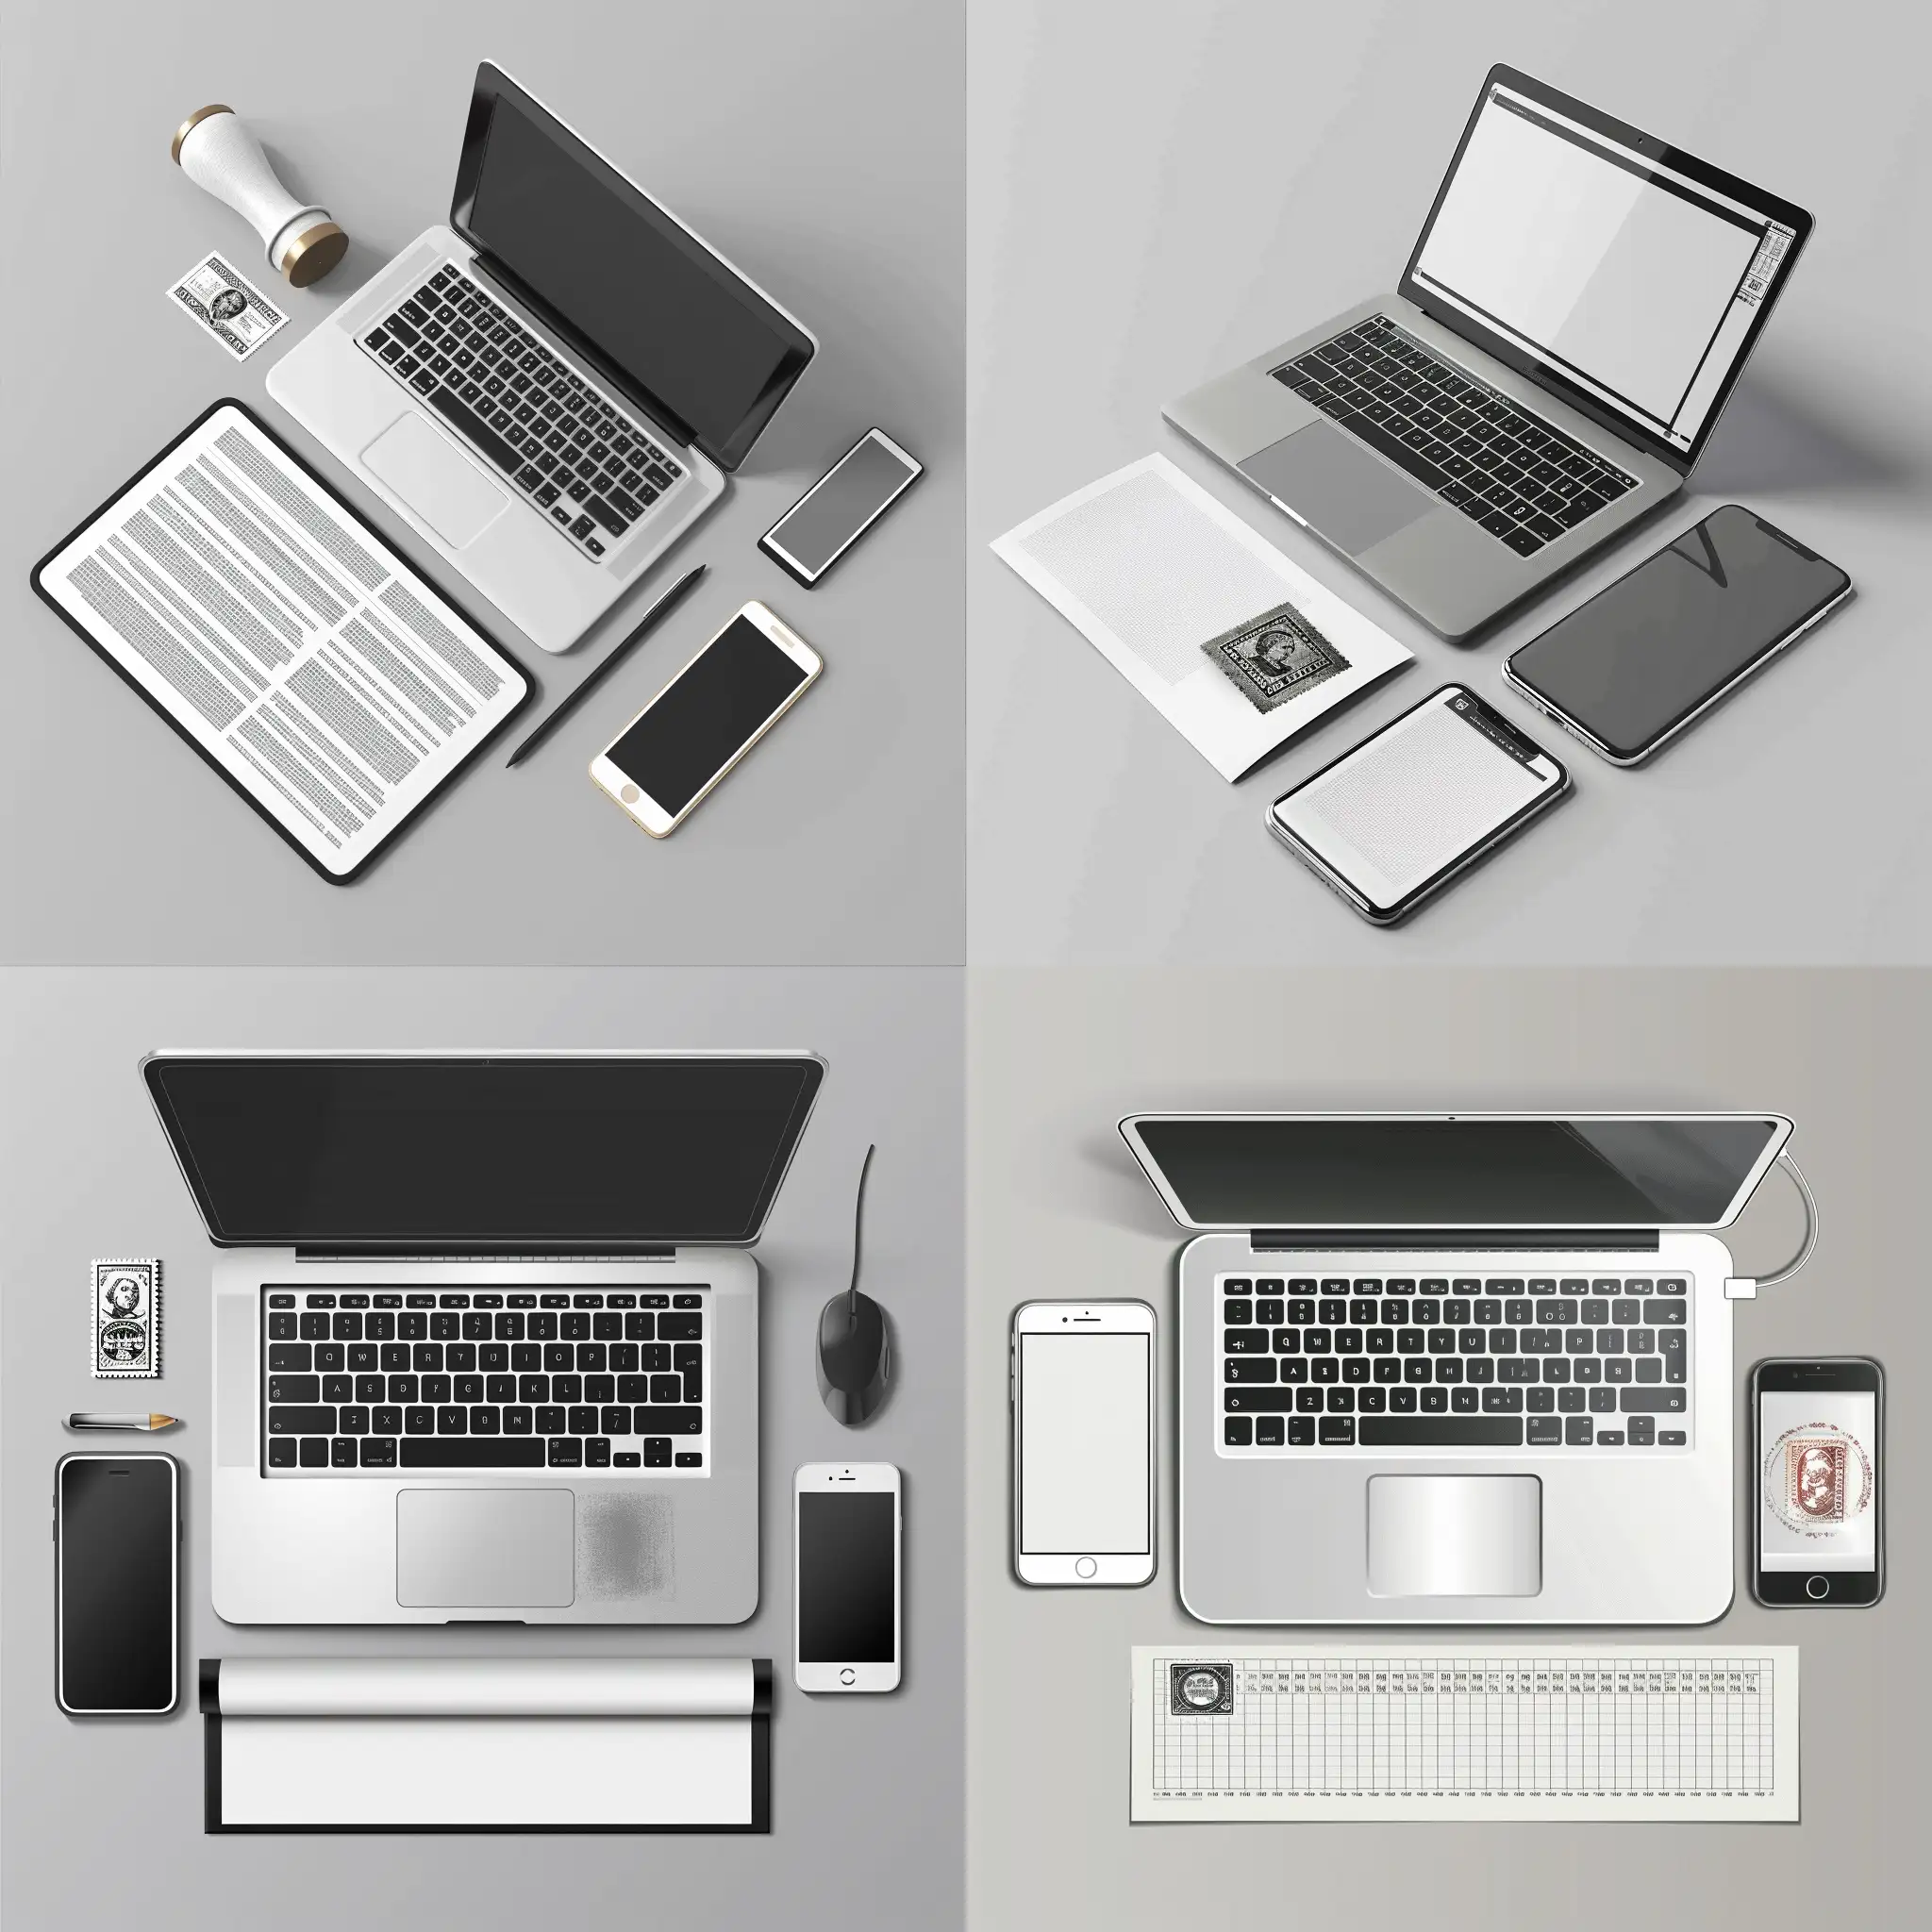 Modern-Devices-Laptop-Phone-and-Stamped-Sheet-in-Realistic-Colors